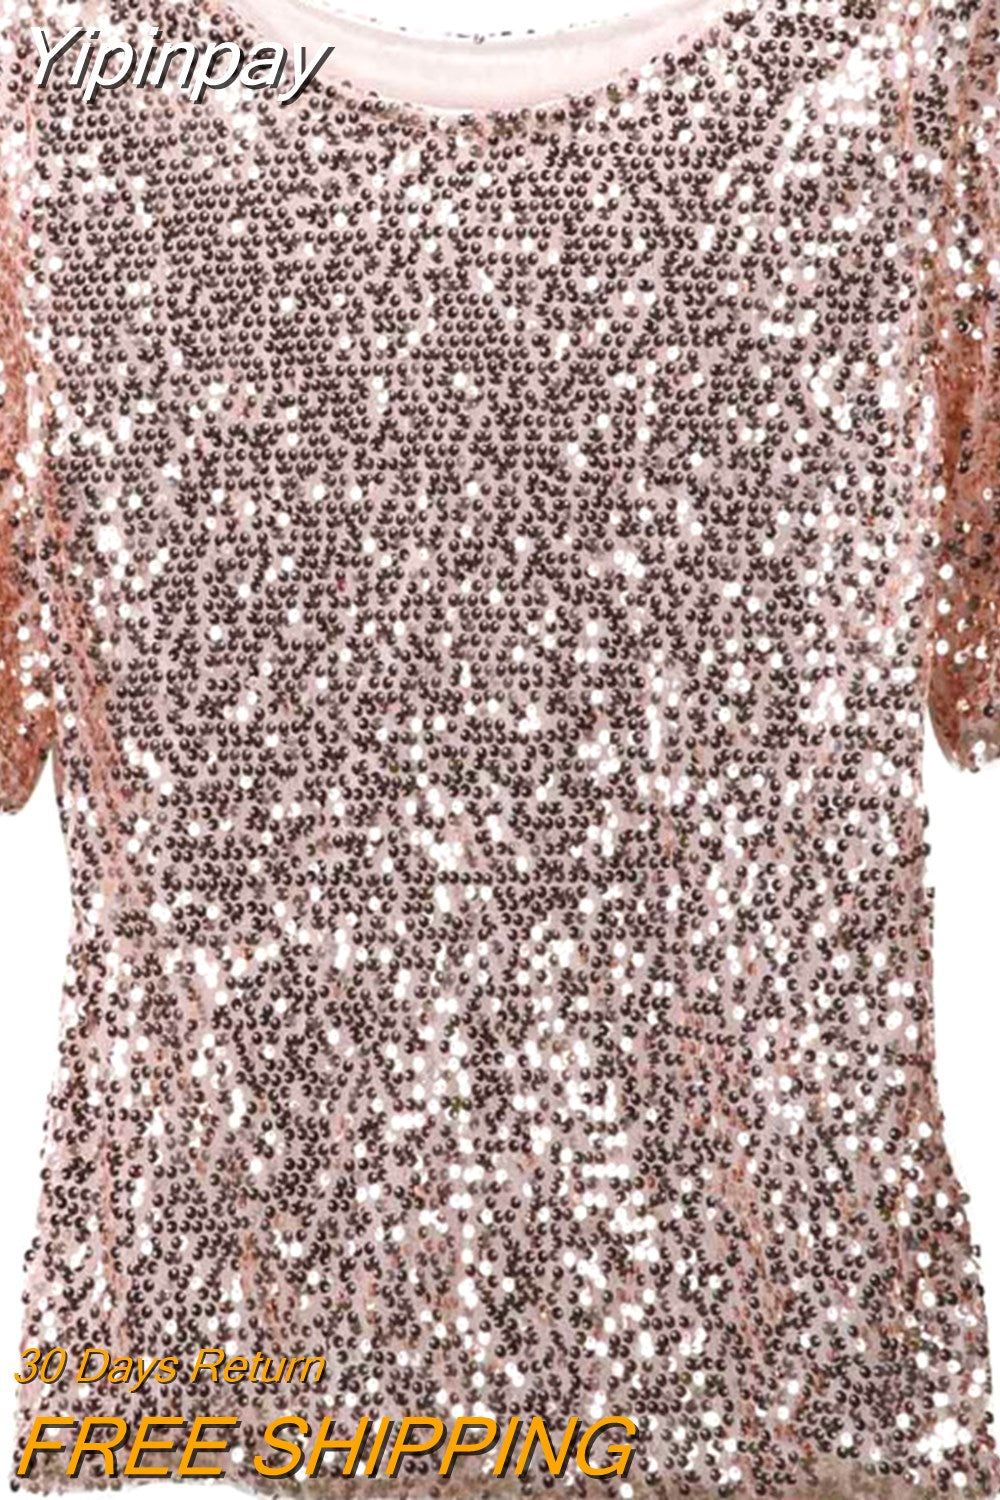 Yipinpay Women Ladies Sequin Short Sleeve Fashion Casual Sparkly Tops Glitter Evening Party Tops Shirt